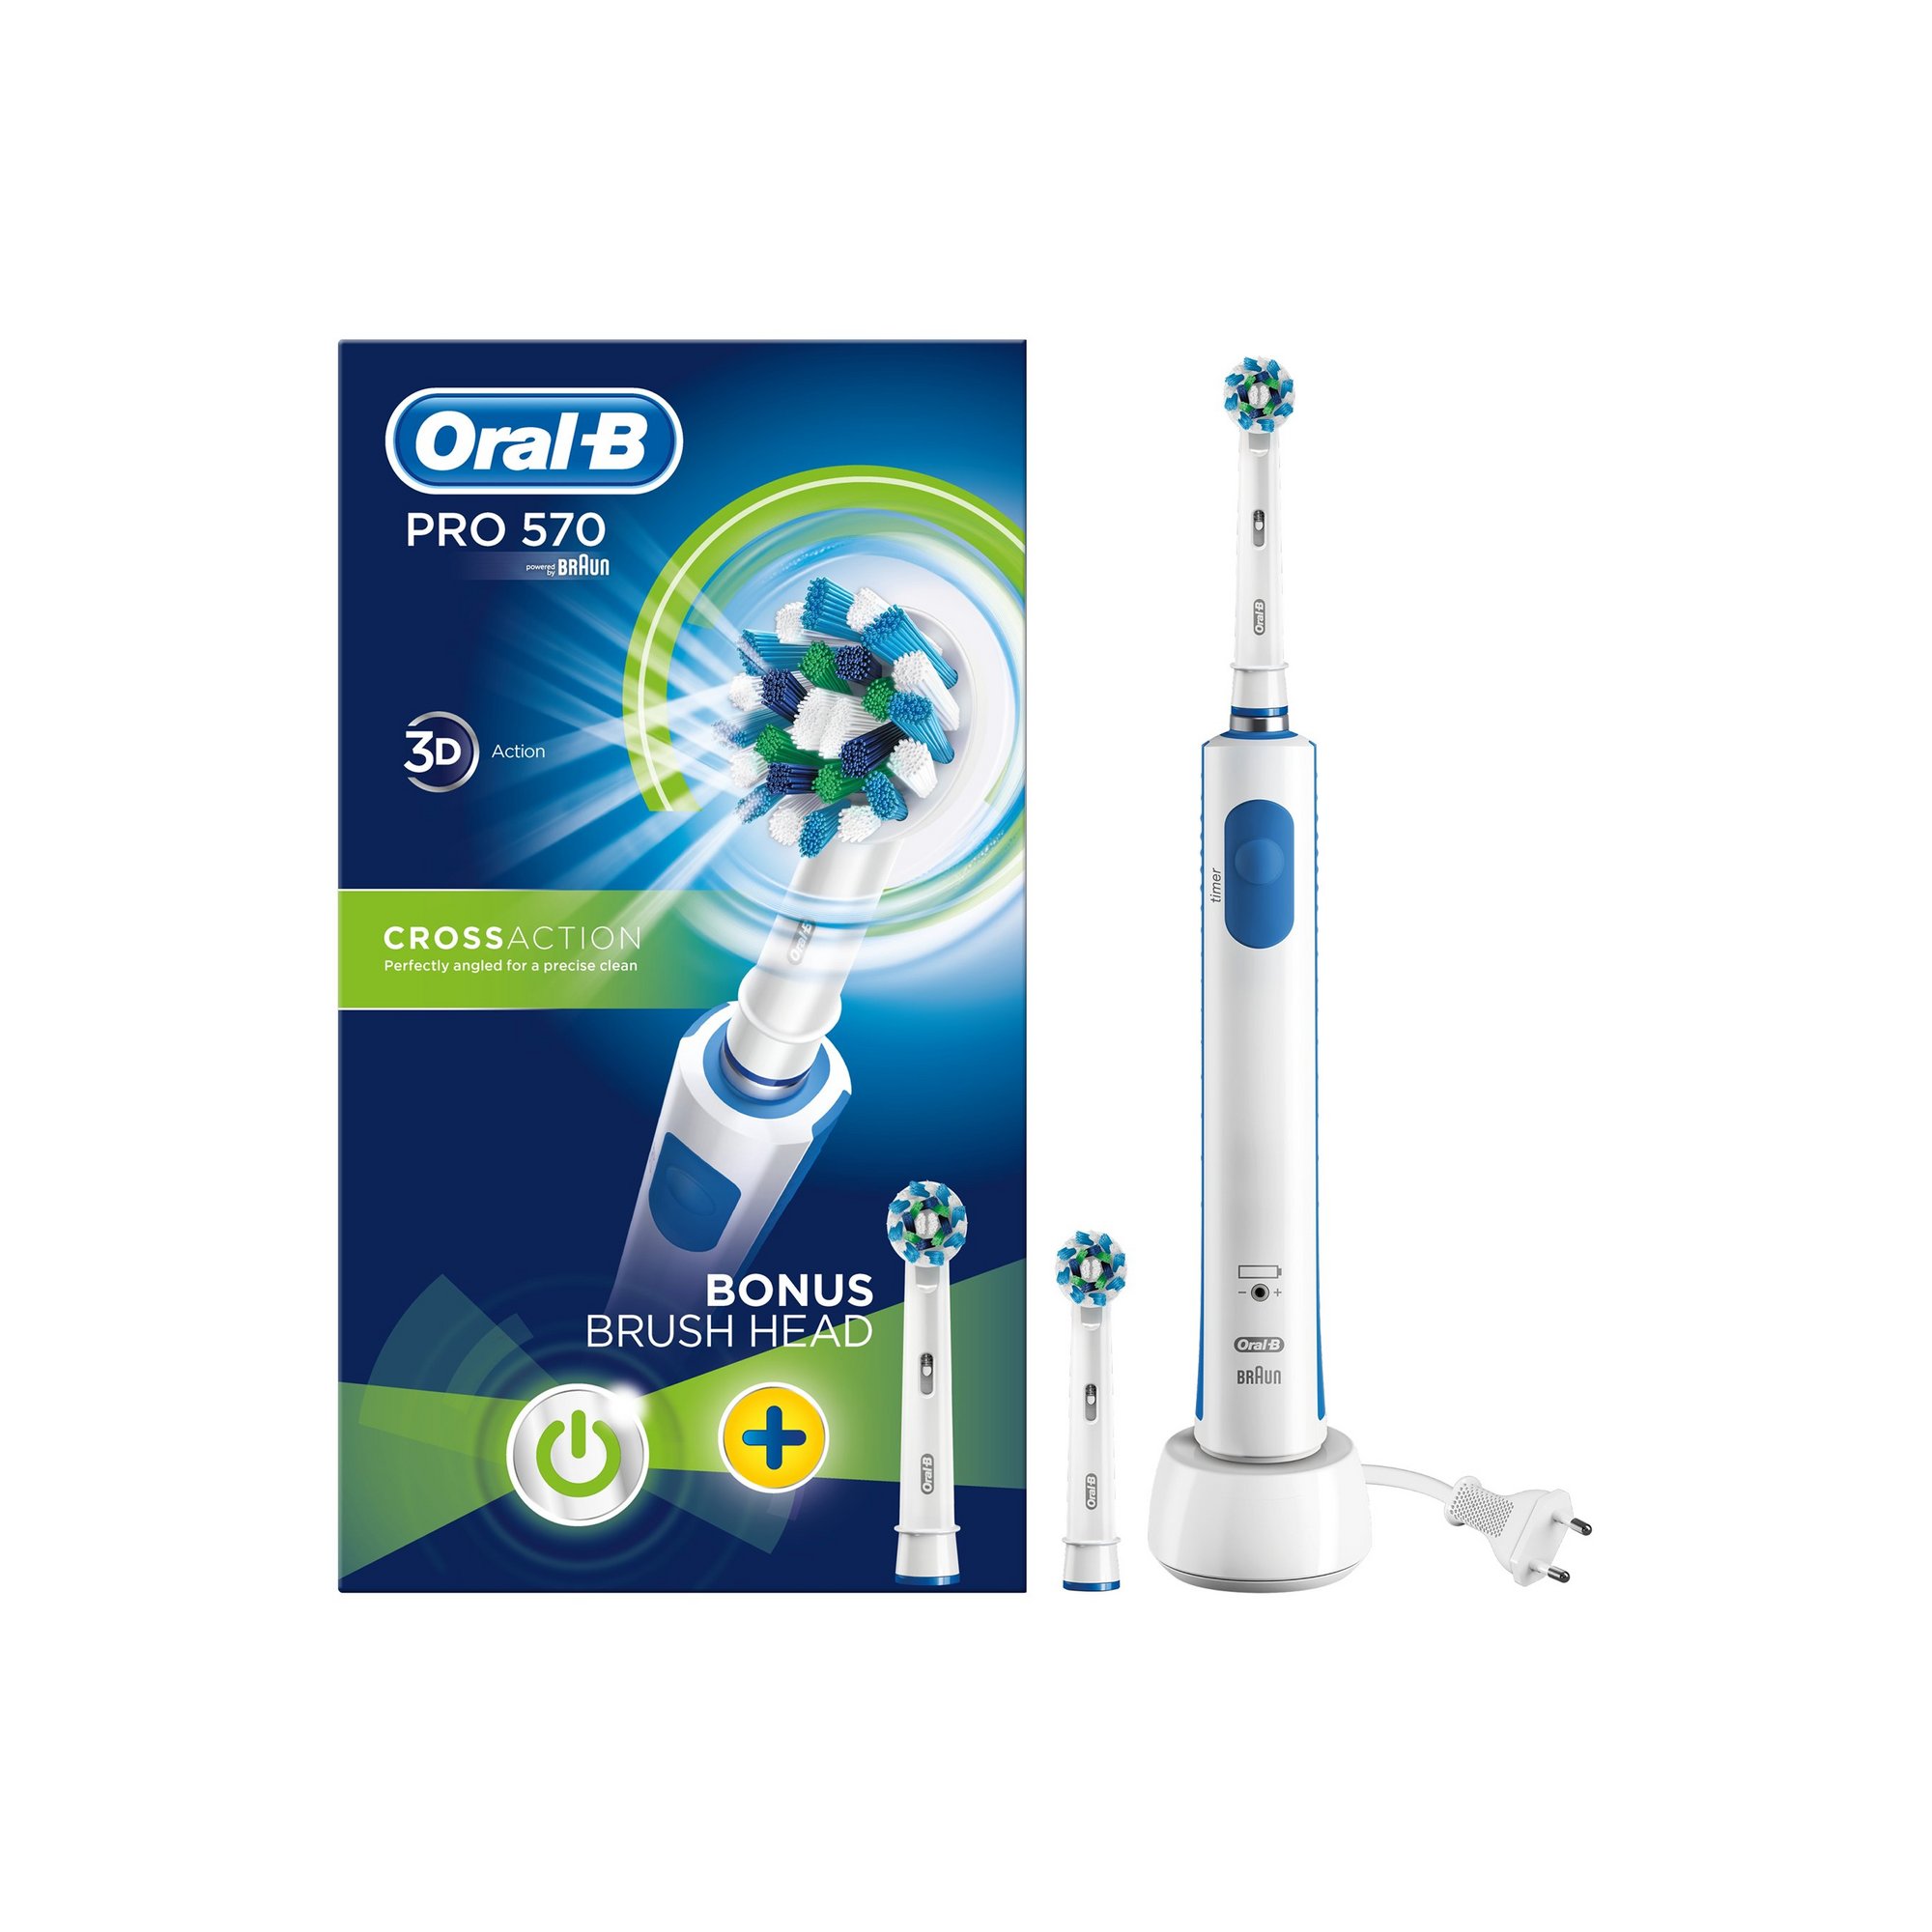 Oral B PRO570 Cross Action Electric Toothbrush